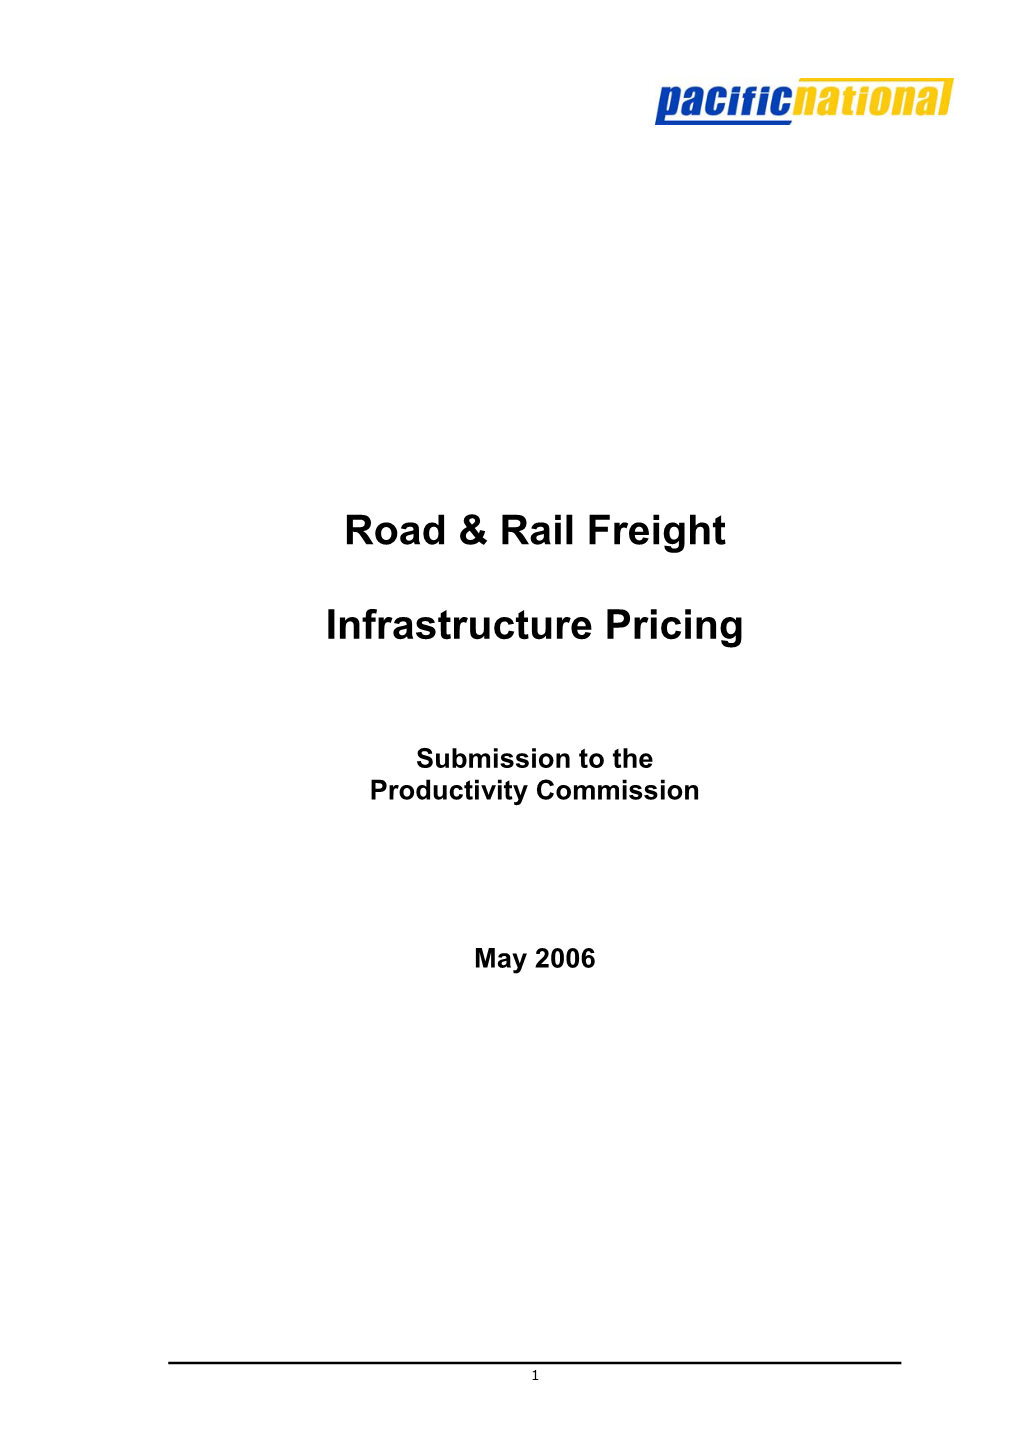 Road & Rail Freight Infrastructure Pricing